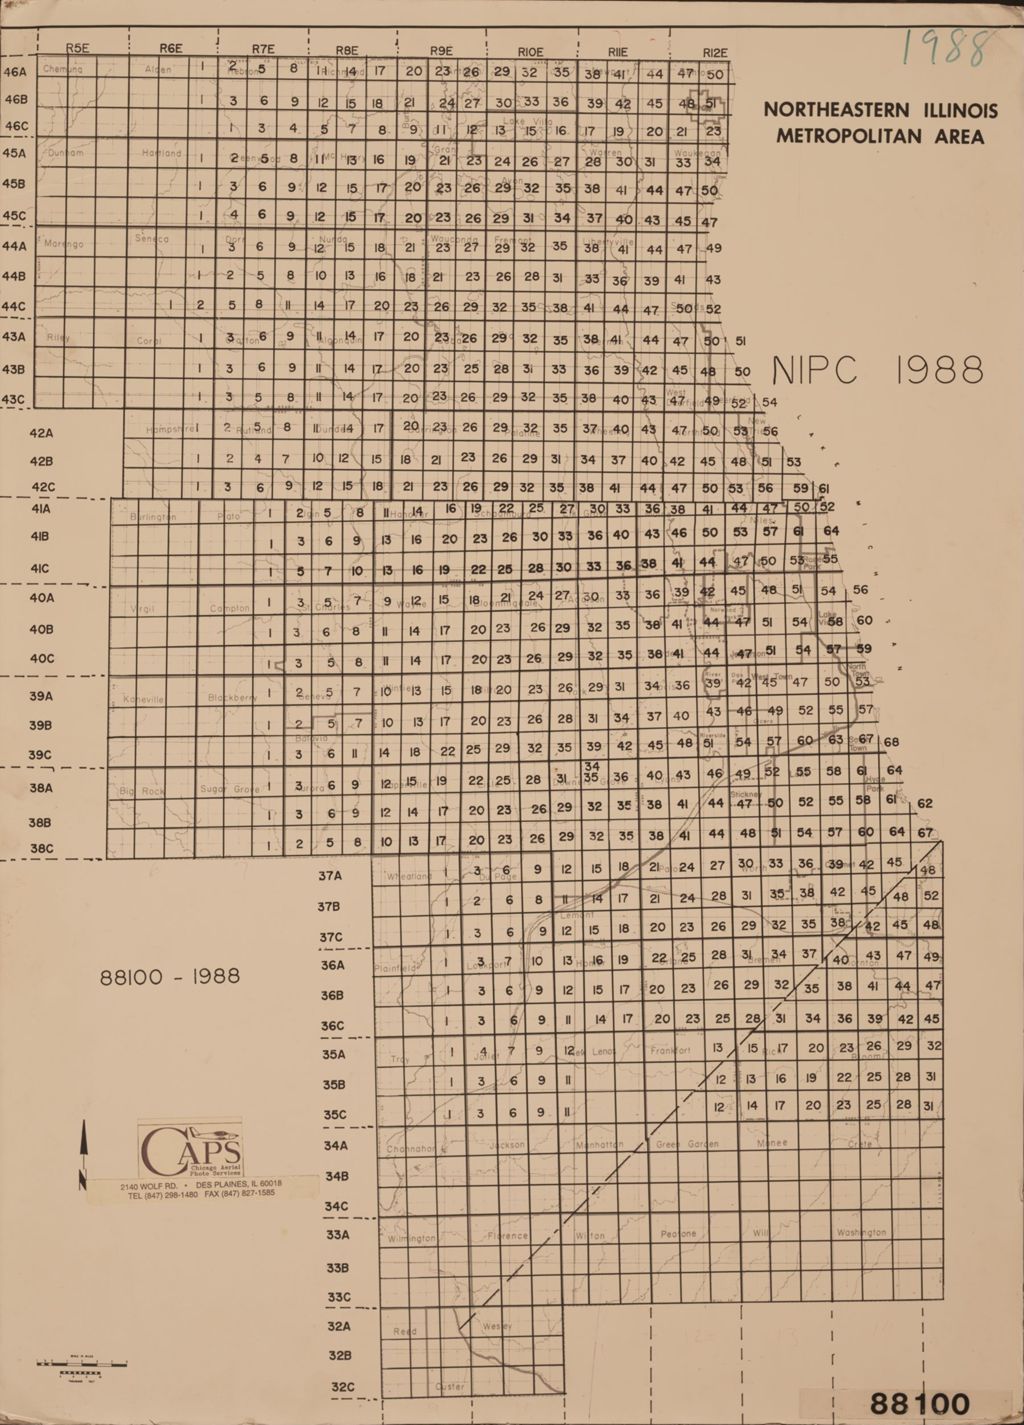 Miniature of Aerial survey index map for 1988 Northeastern Illinois Planning Commission survey (88100)